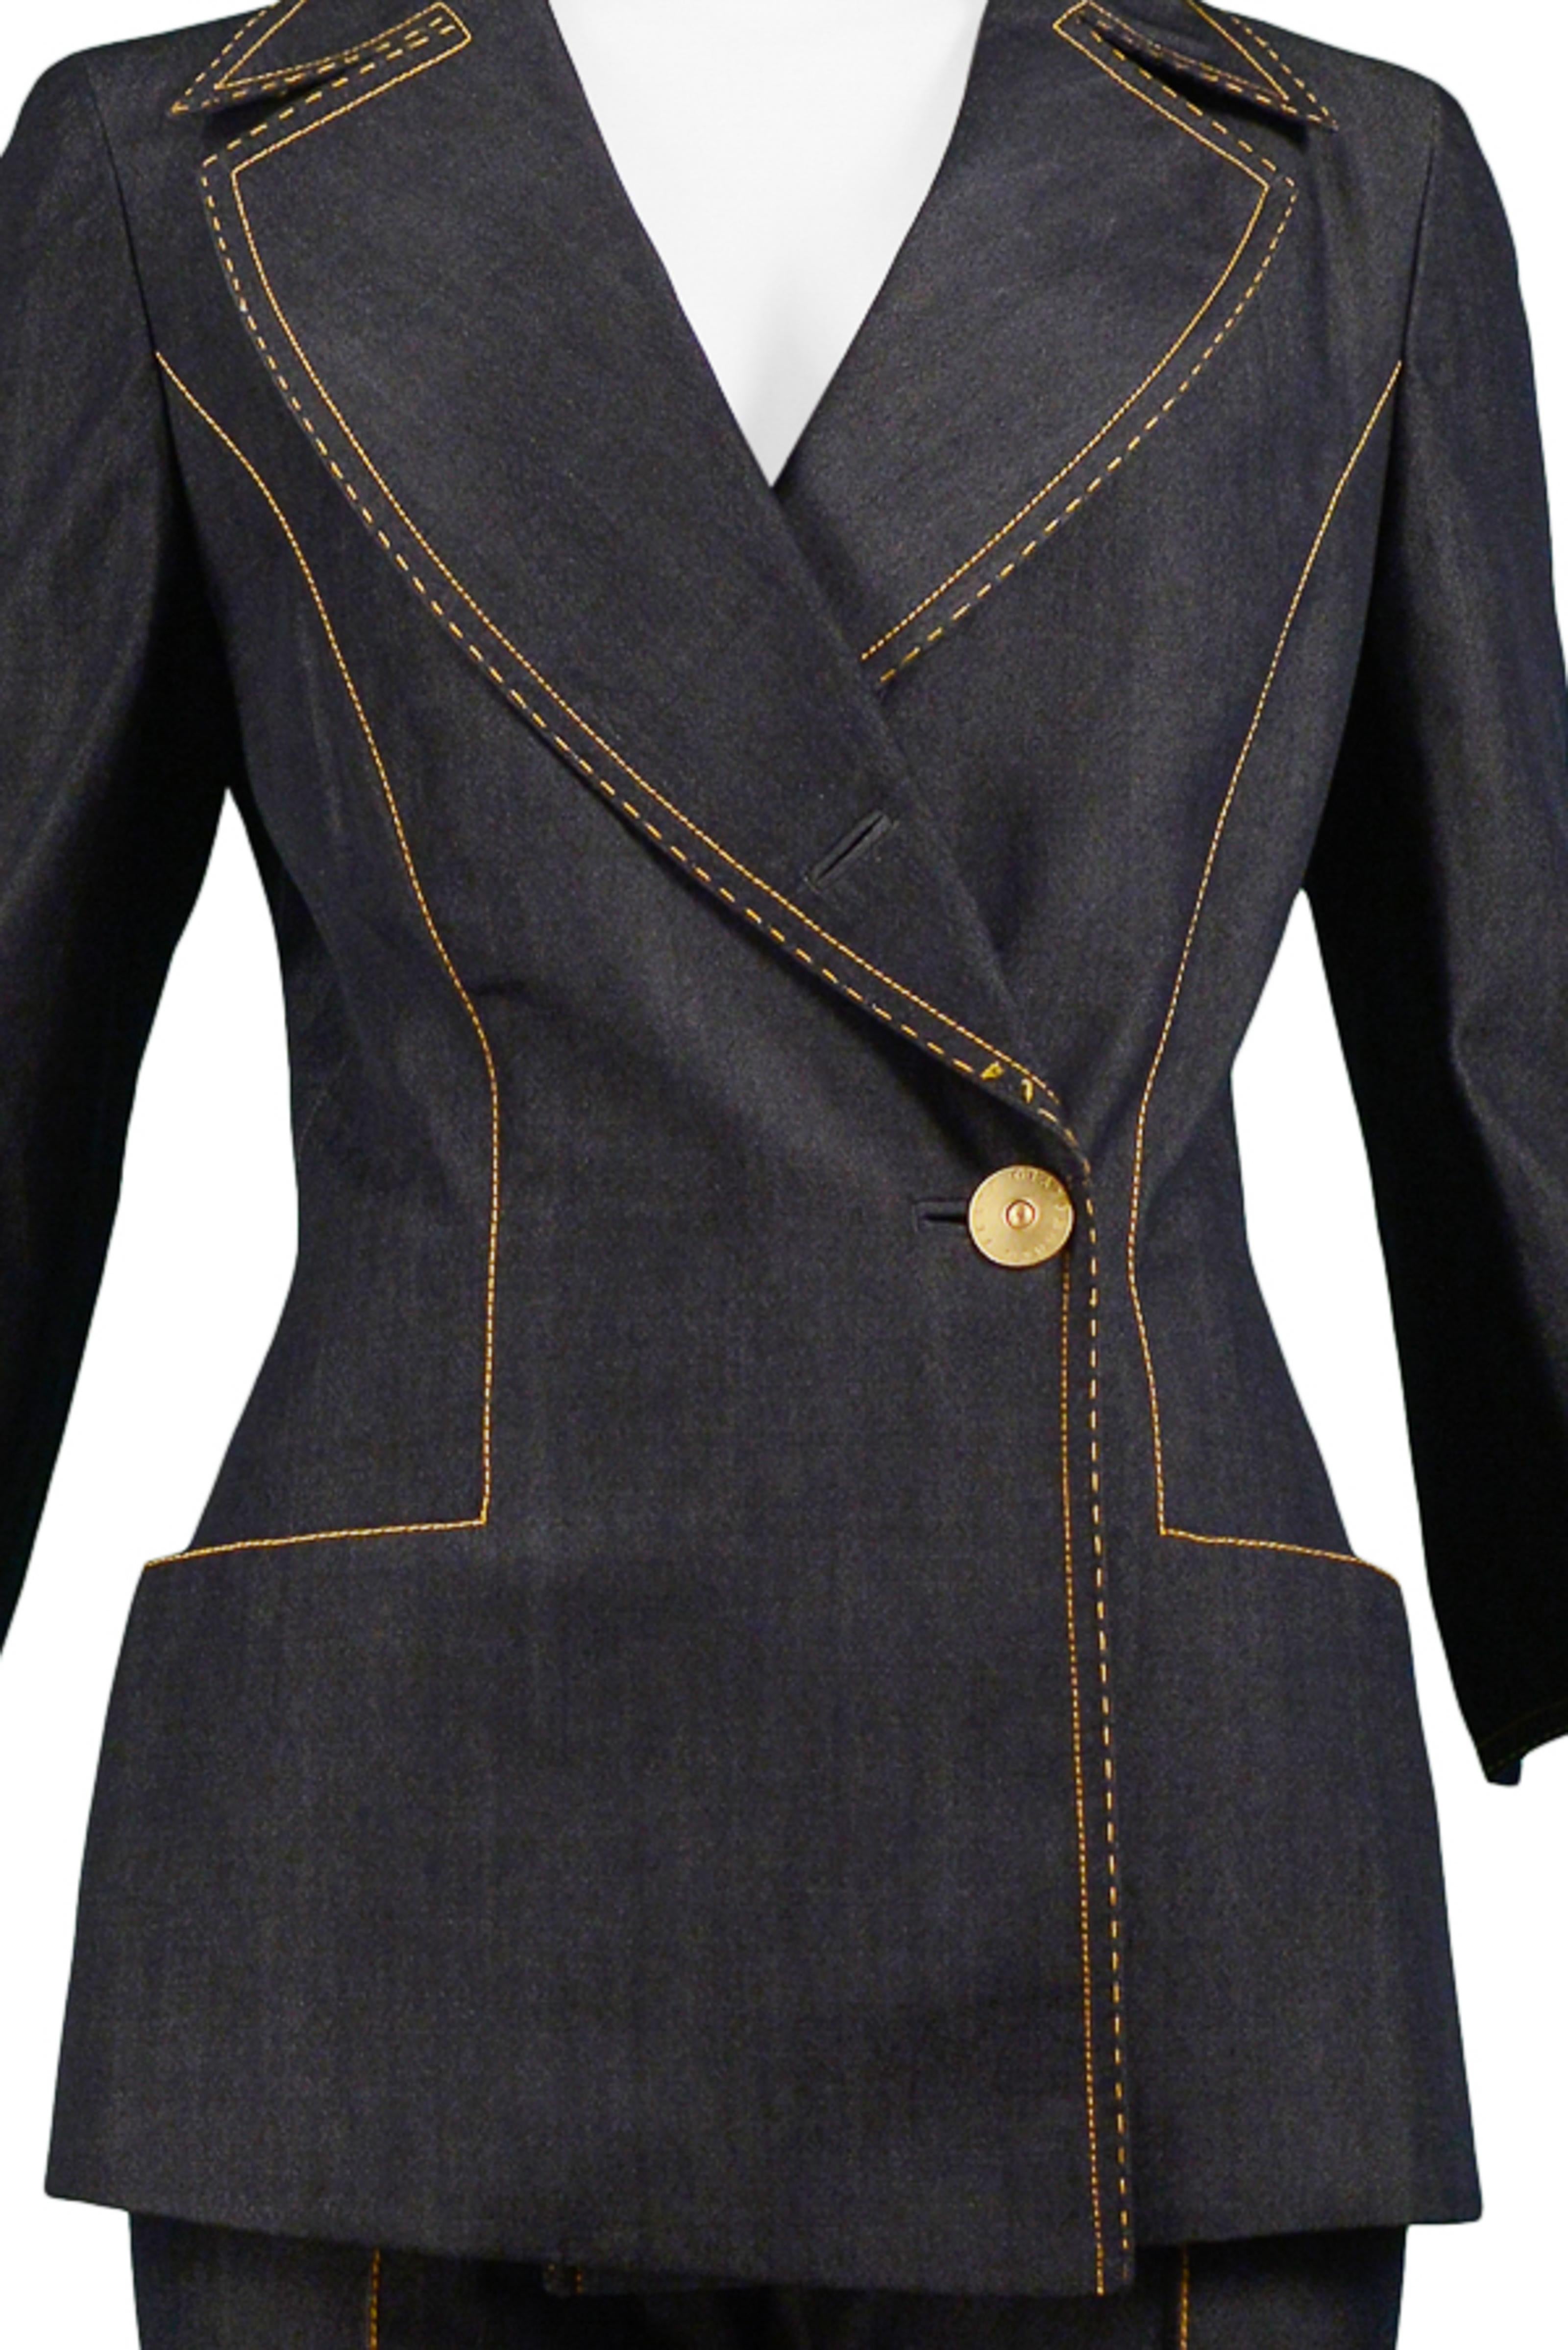 Women's Gianfranco Ferre Denim Inspired Wool Suit With Yellow Stitching 1999 For Sale